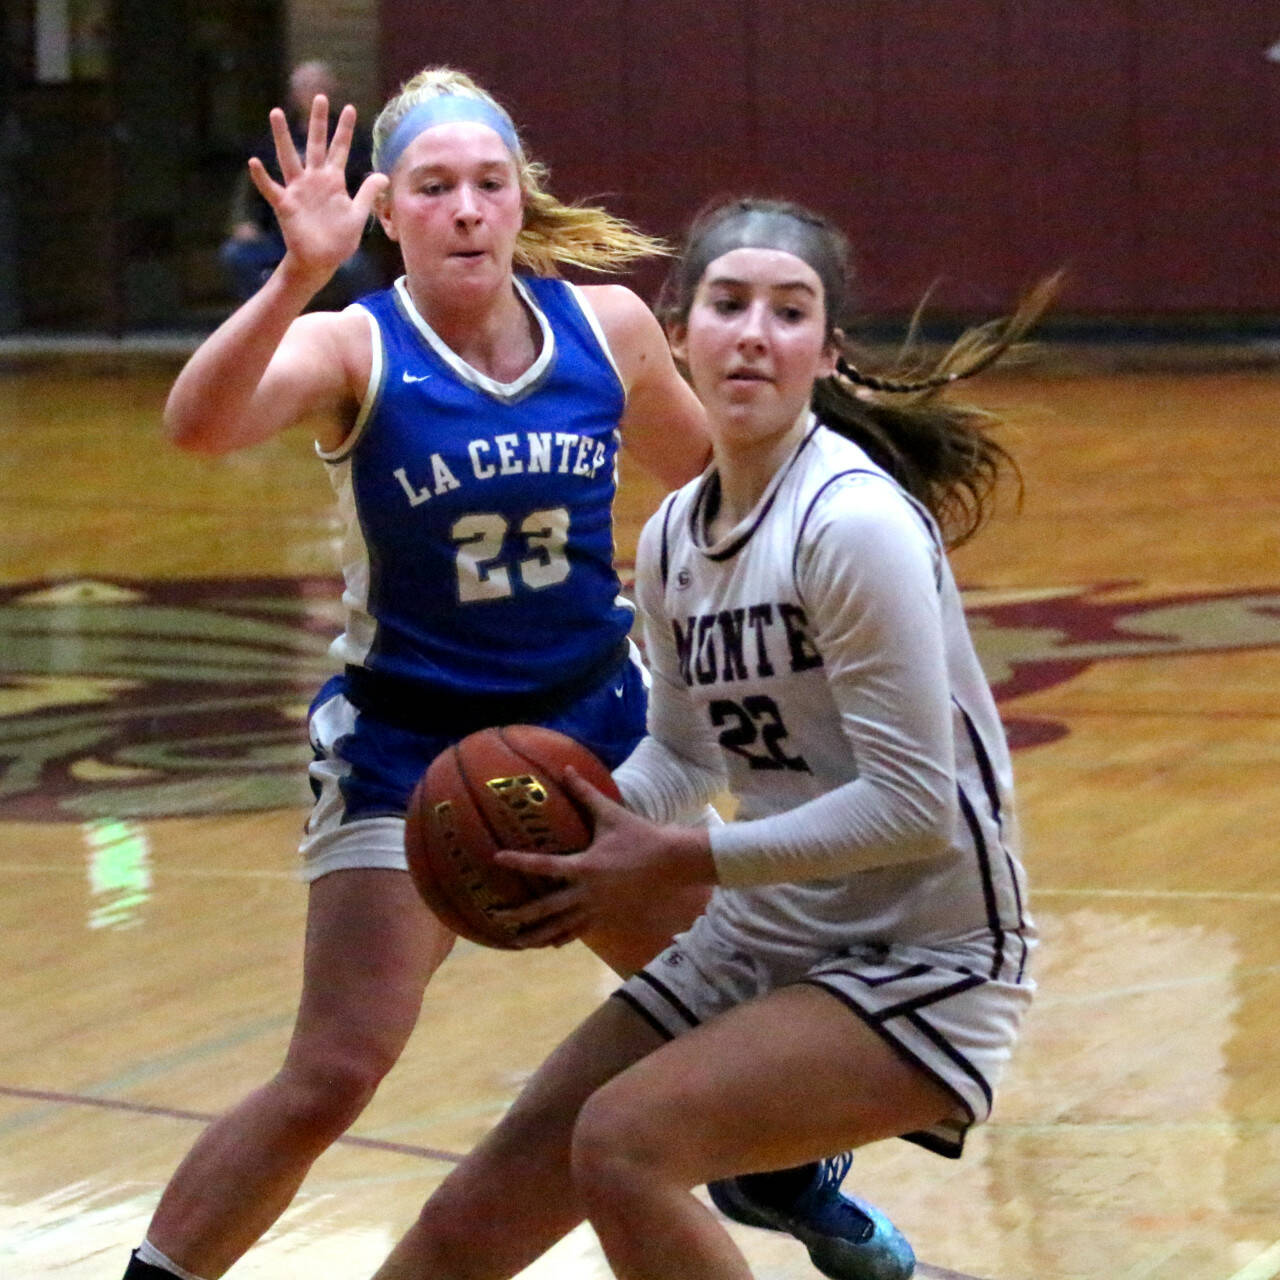 RYAN SPARKS | THE DAILY WORLD Montesano’s Ava Schrader (22) looks to pass while being defended by La Center’s Mekenzie Schockelt (23) during the Bulldogs’ 52-34 victory in a 1A District 4 quarterfinal game on Thursday in Montesano.